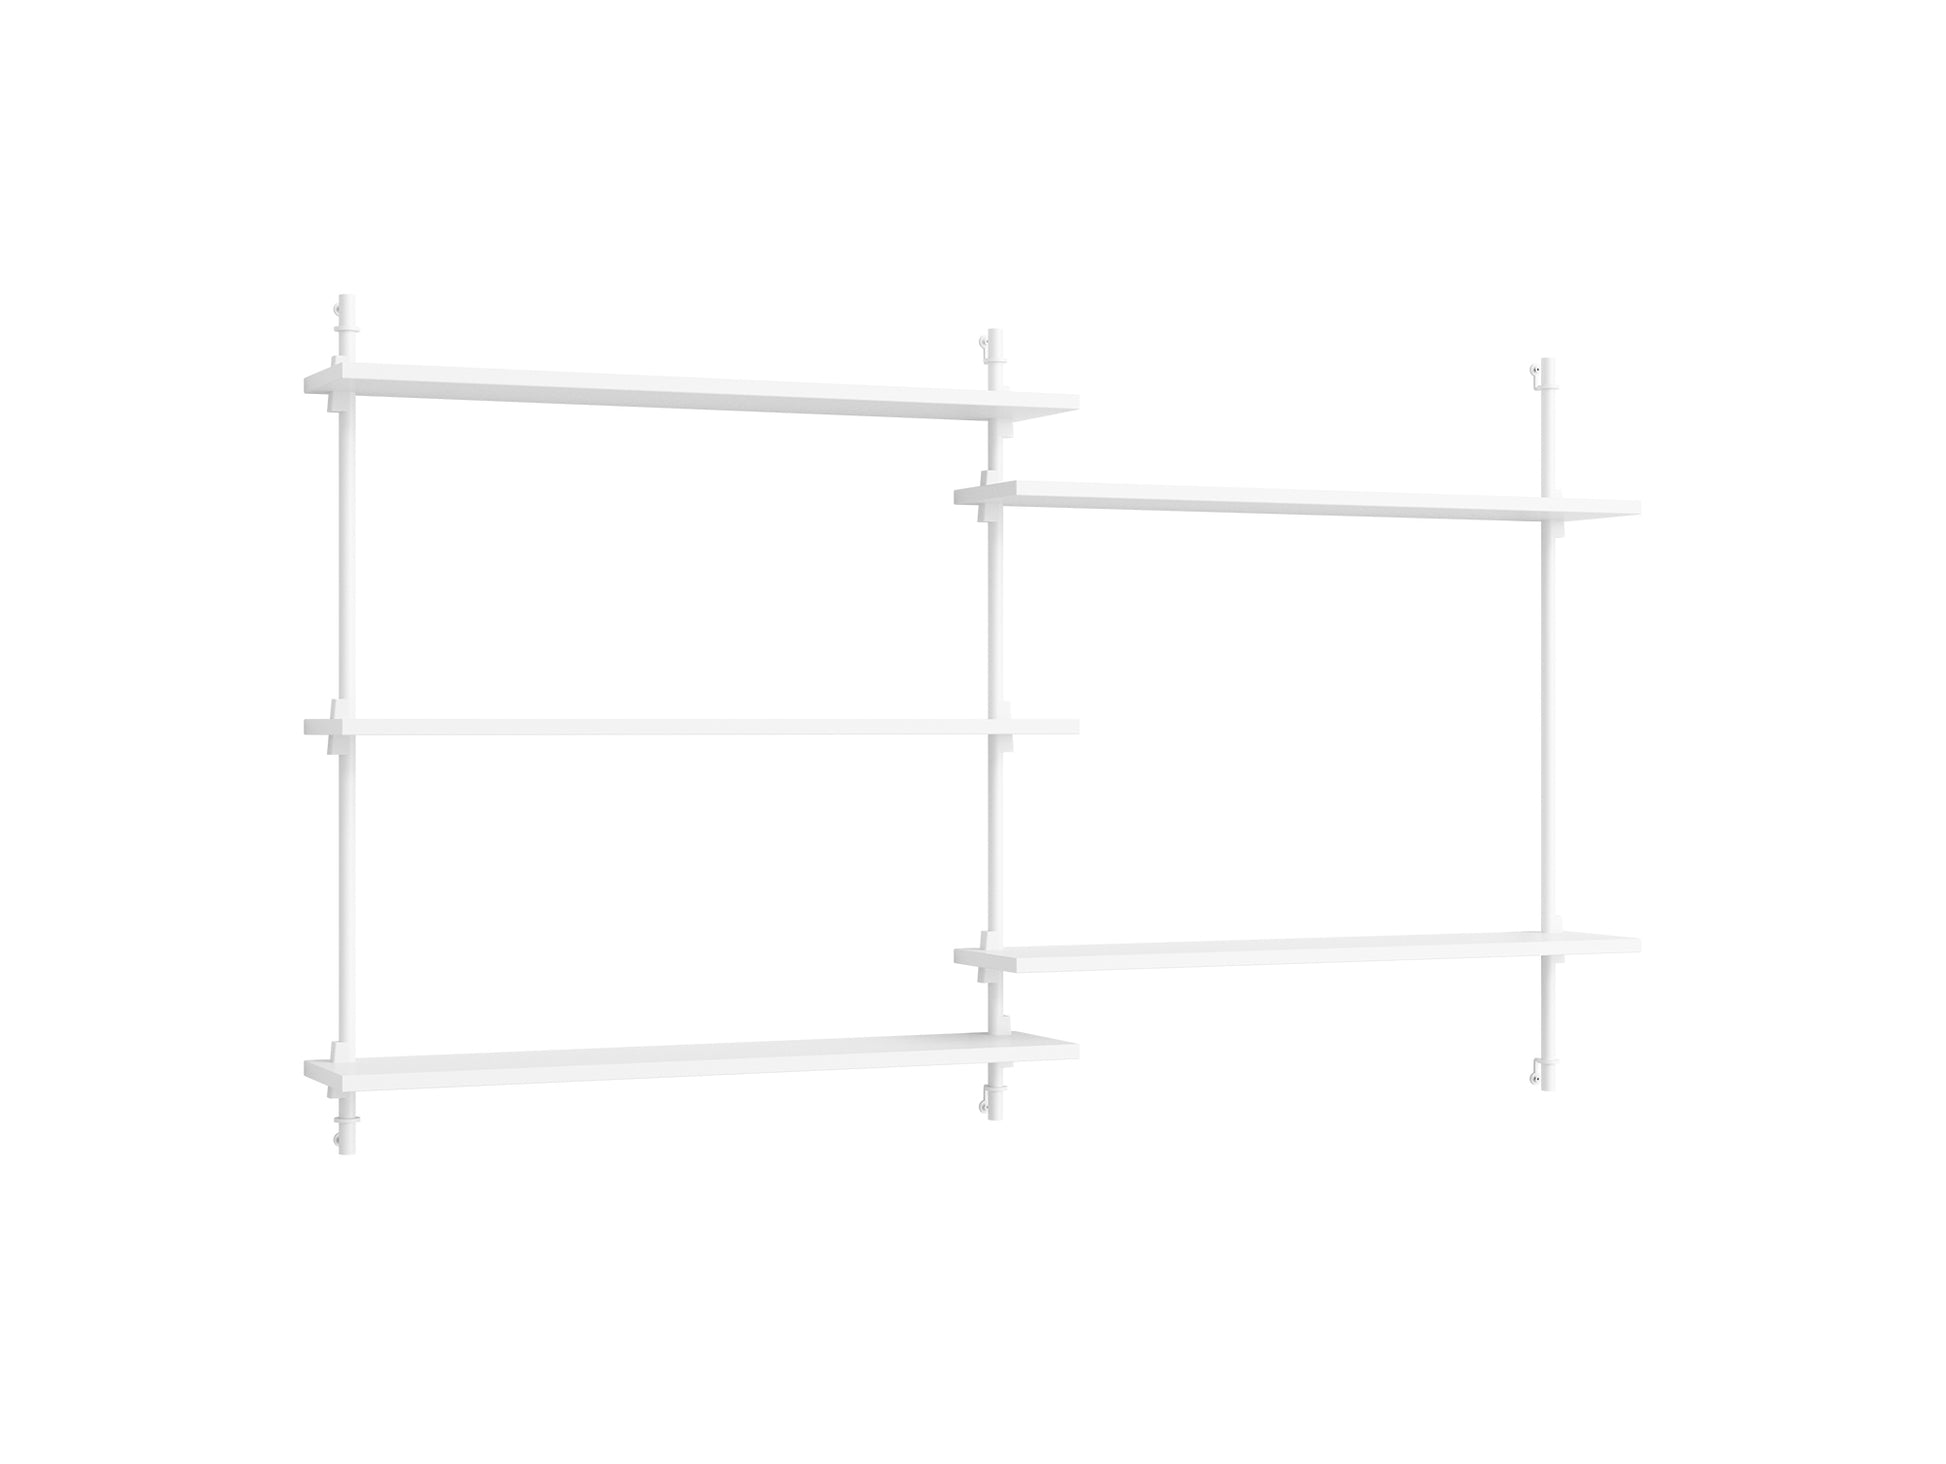 Wall Shelving System Sets (85 cm) by Moebe - WS.85.2 / White Uprights / White Painted Oak